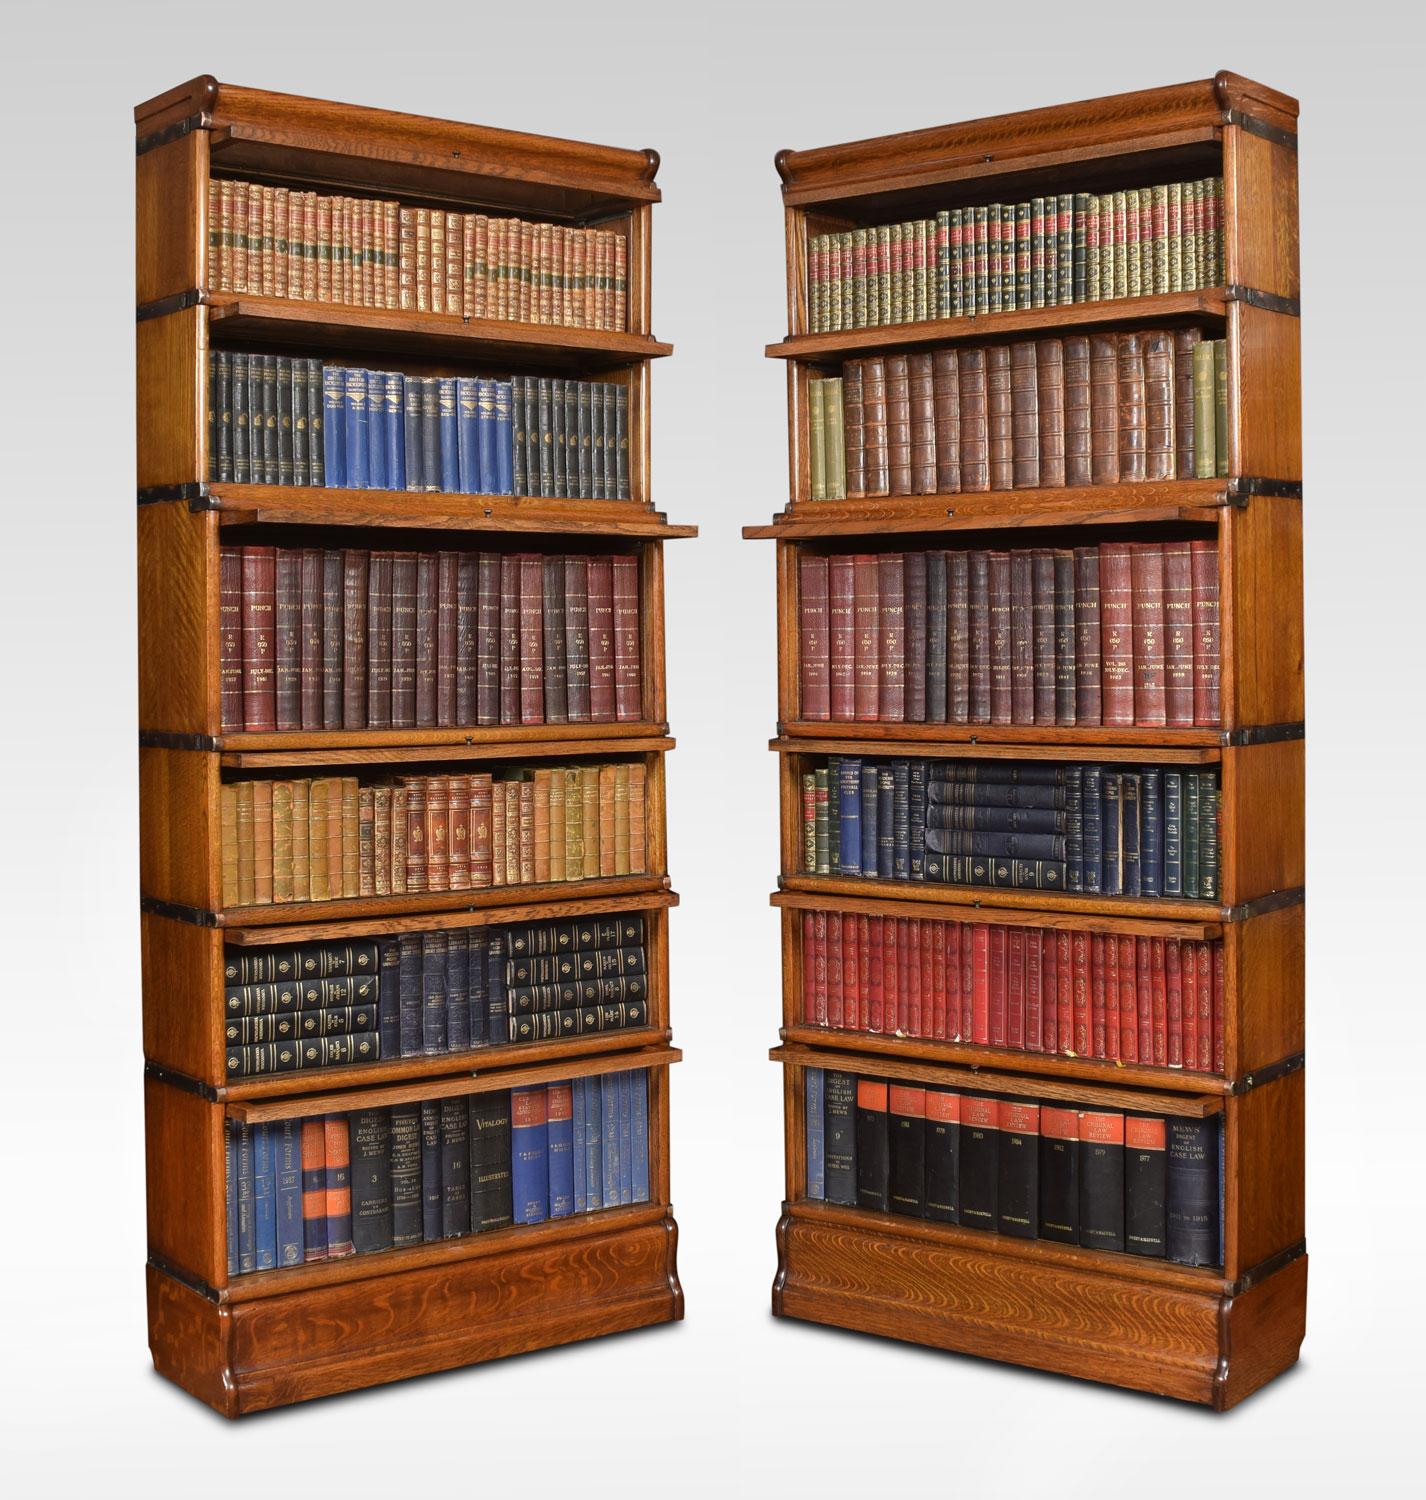 Pair of oak Globe Wernicke bookcases, the moulded top above six sections all having glazed doors. Raised up on plinth base.
Dimensions
Height 81 inches
Width 34 inches
Depth 12.5 inches.